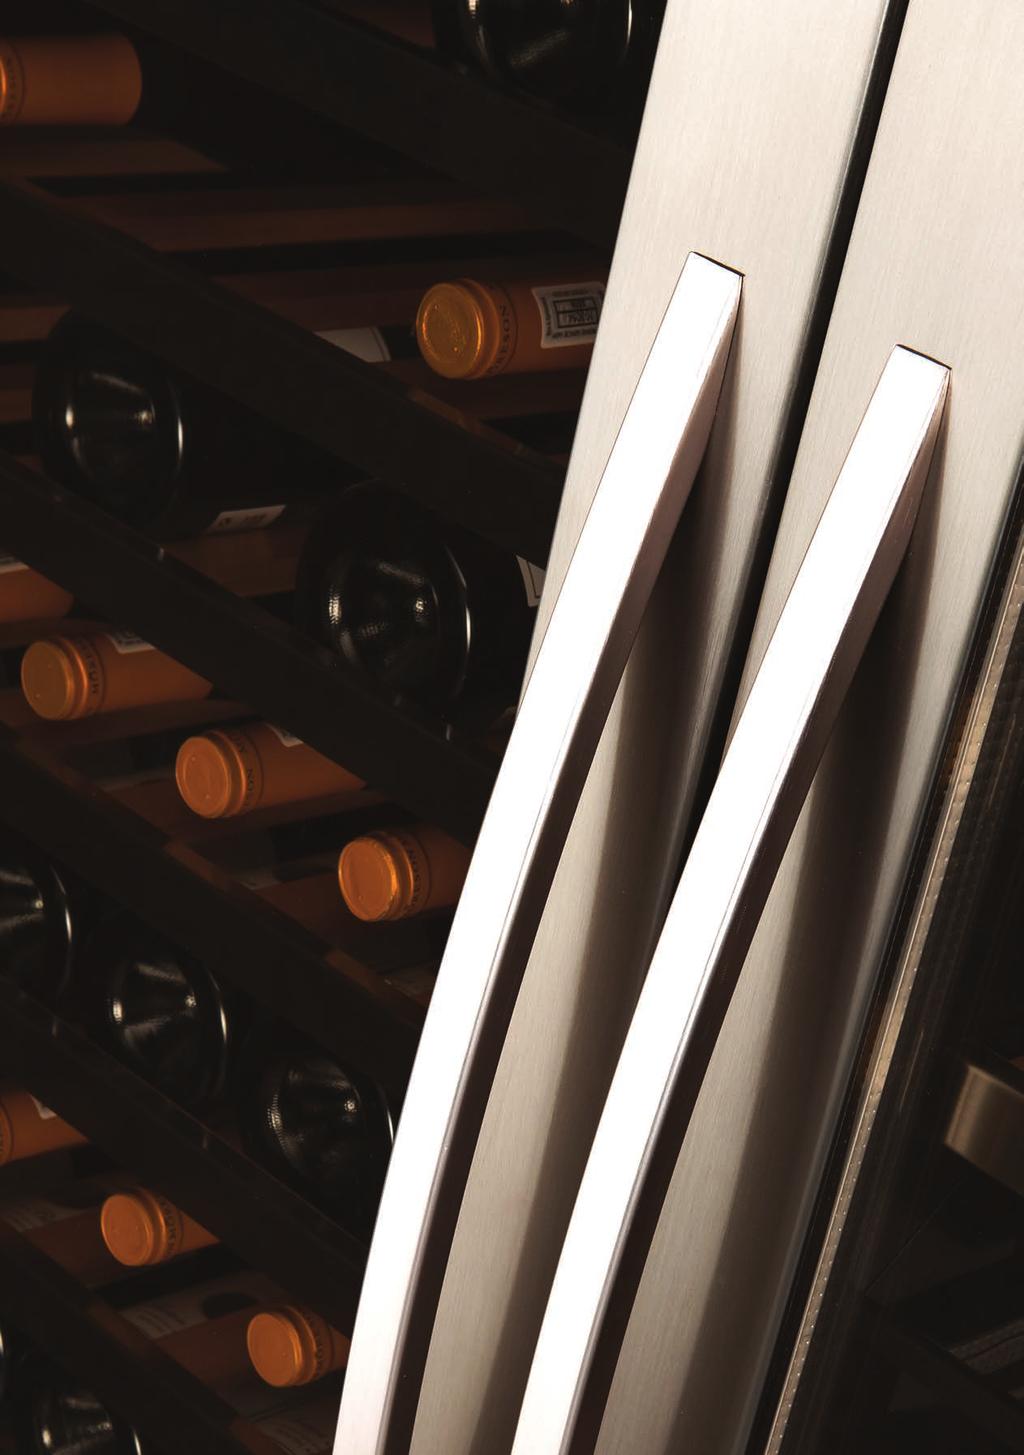 consistency classic range is key Our elegant range of stainless steel wine cabinets features